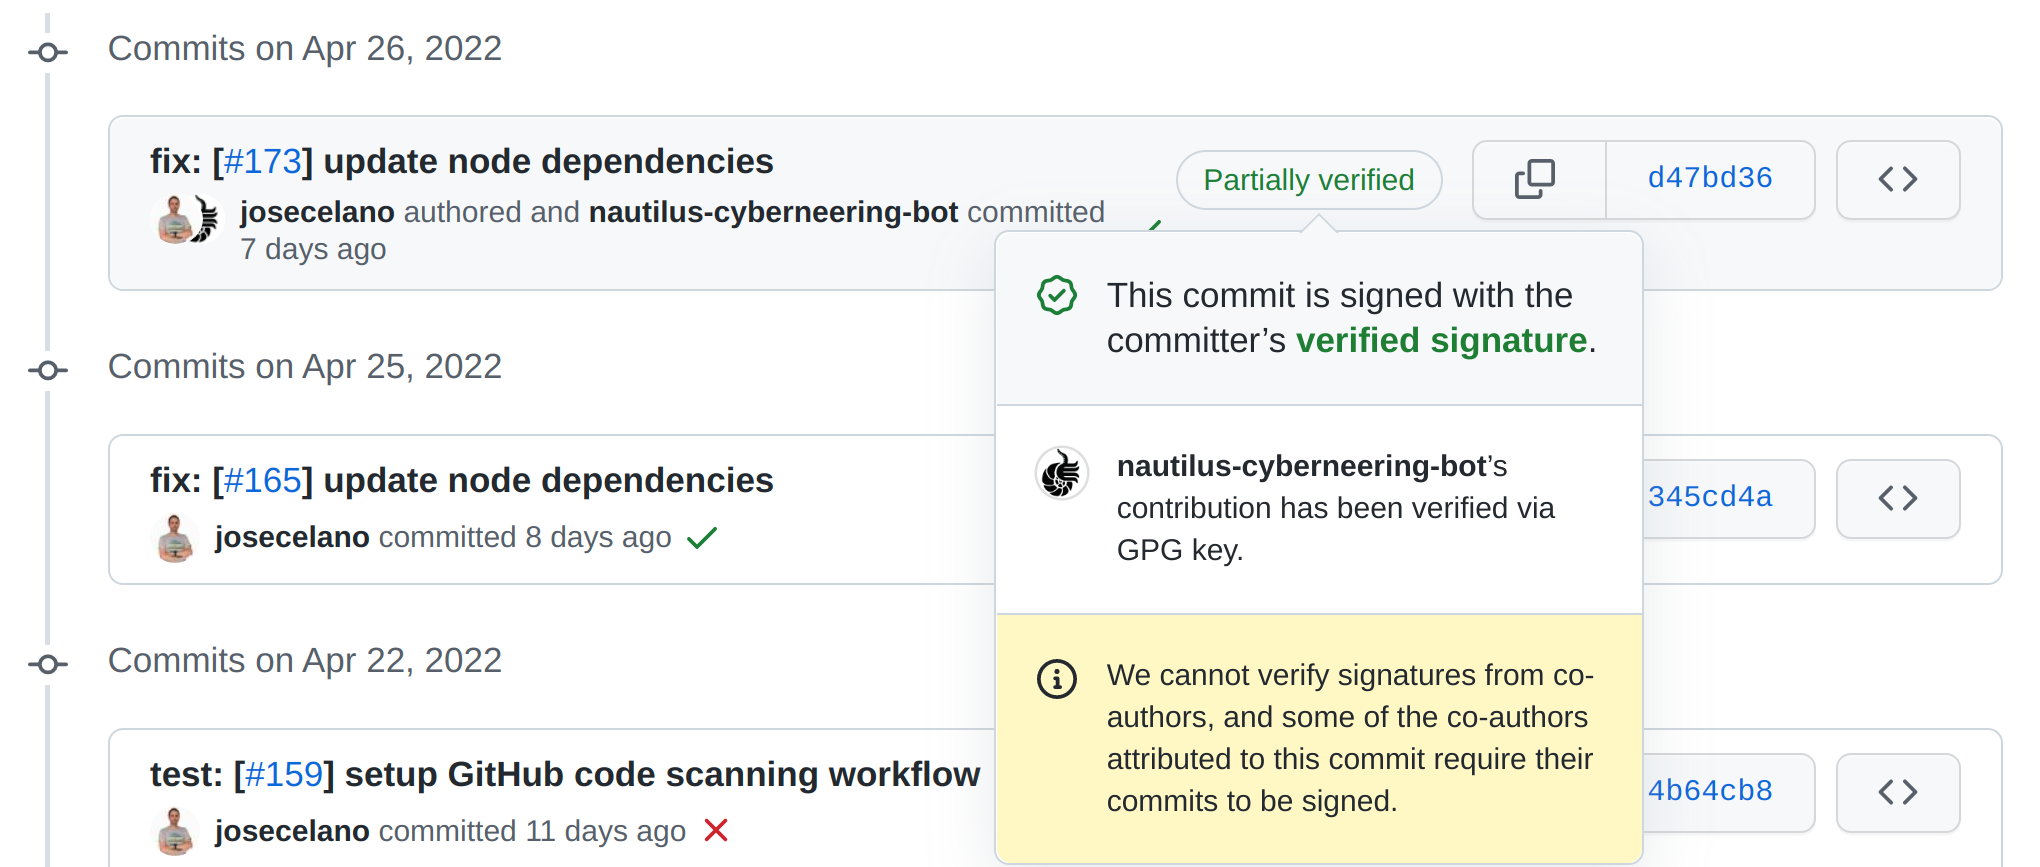 Commit with partially verified signature